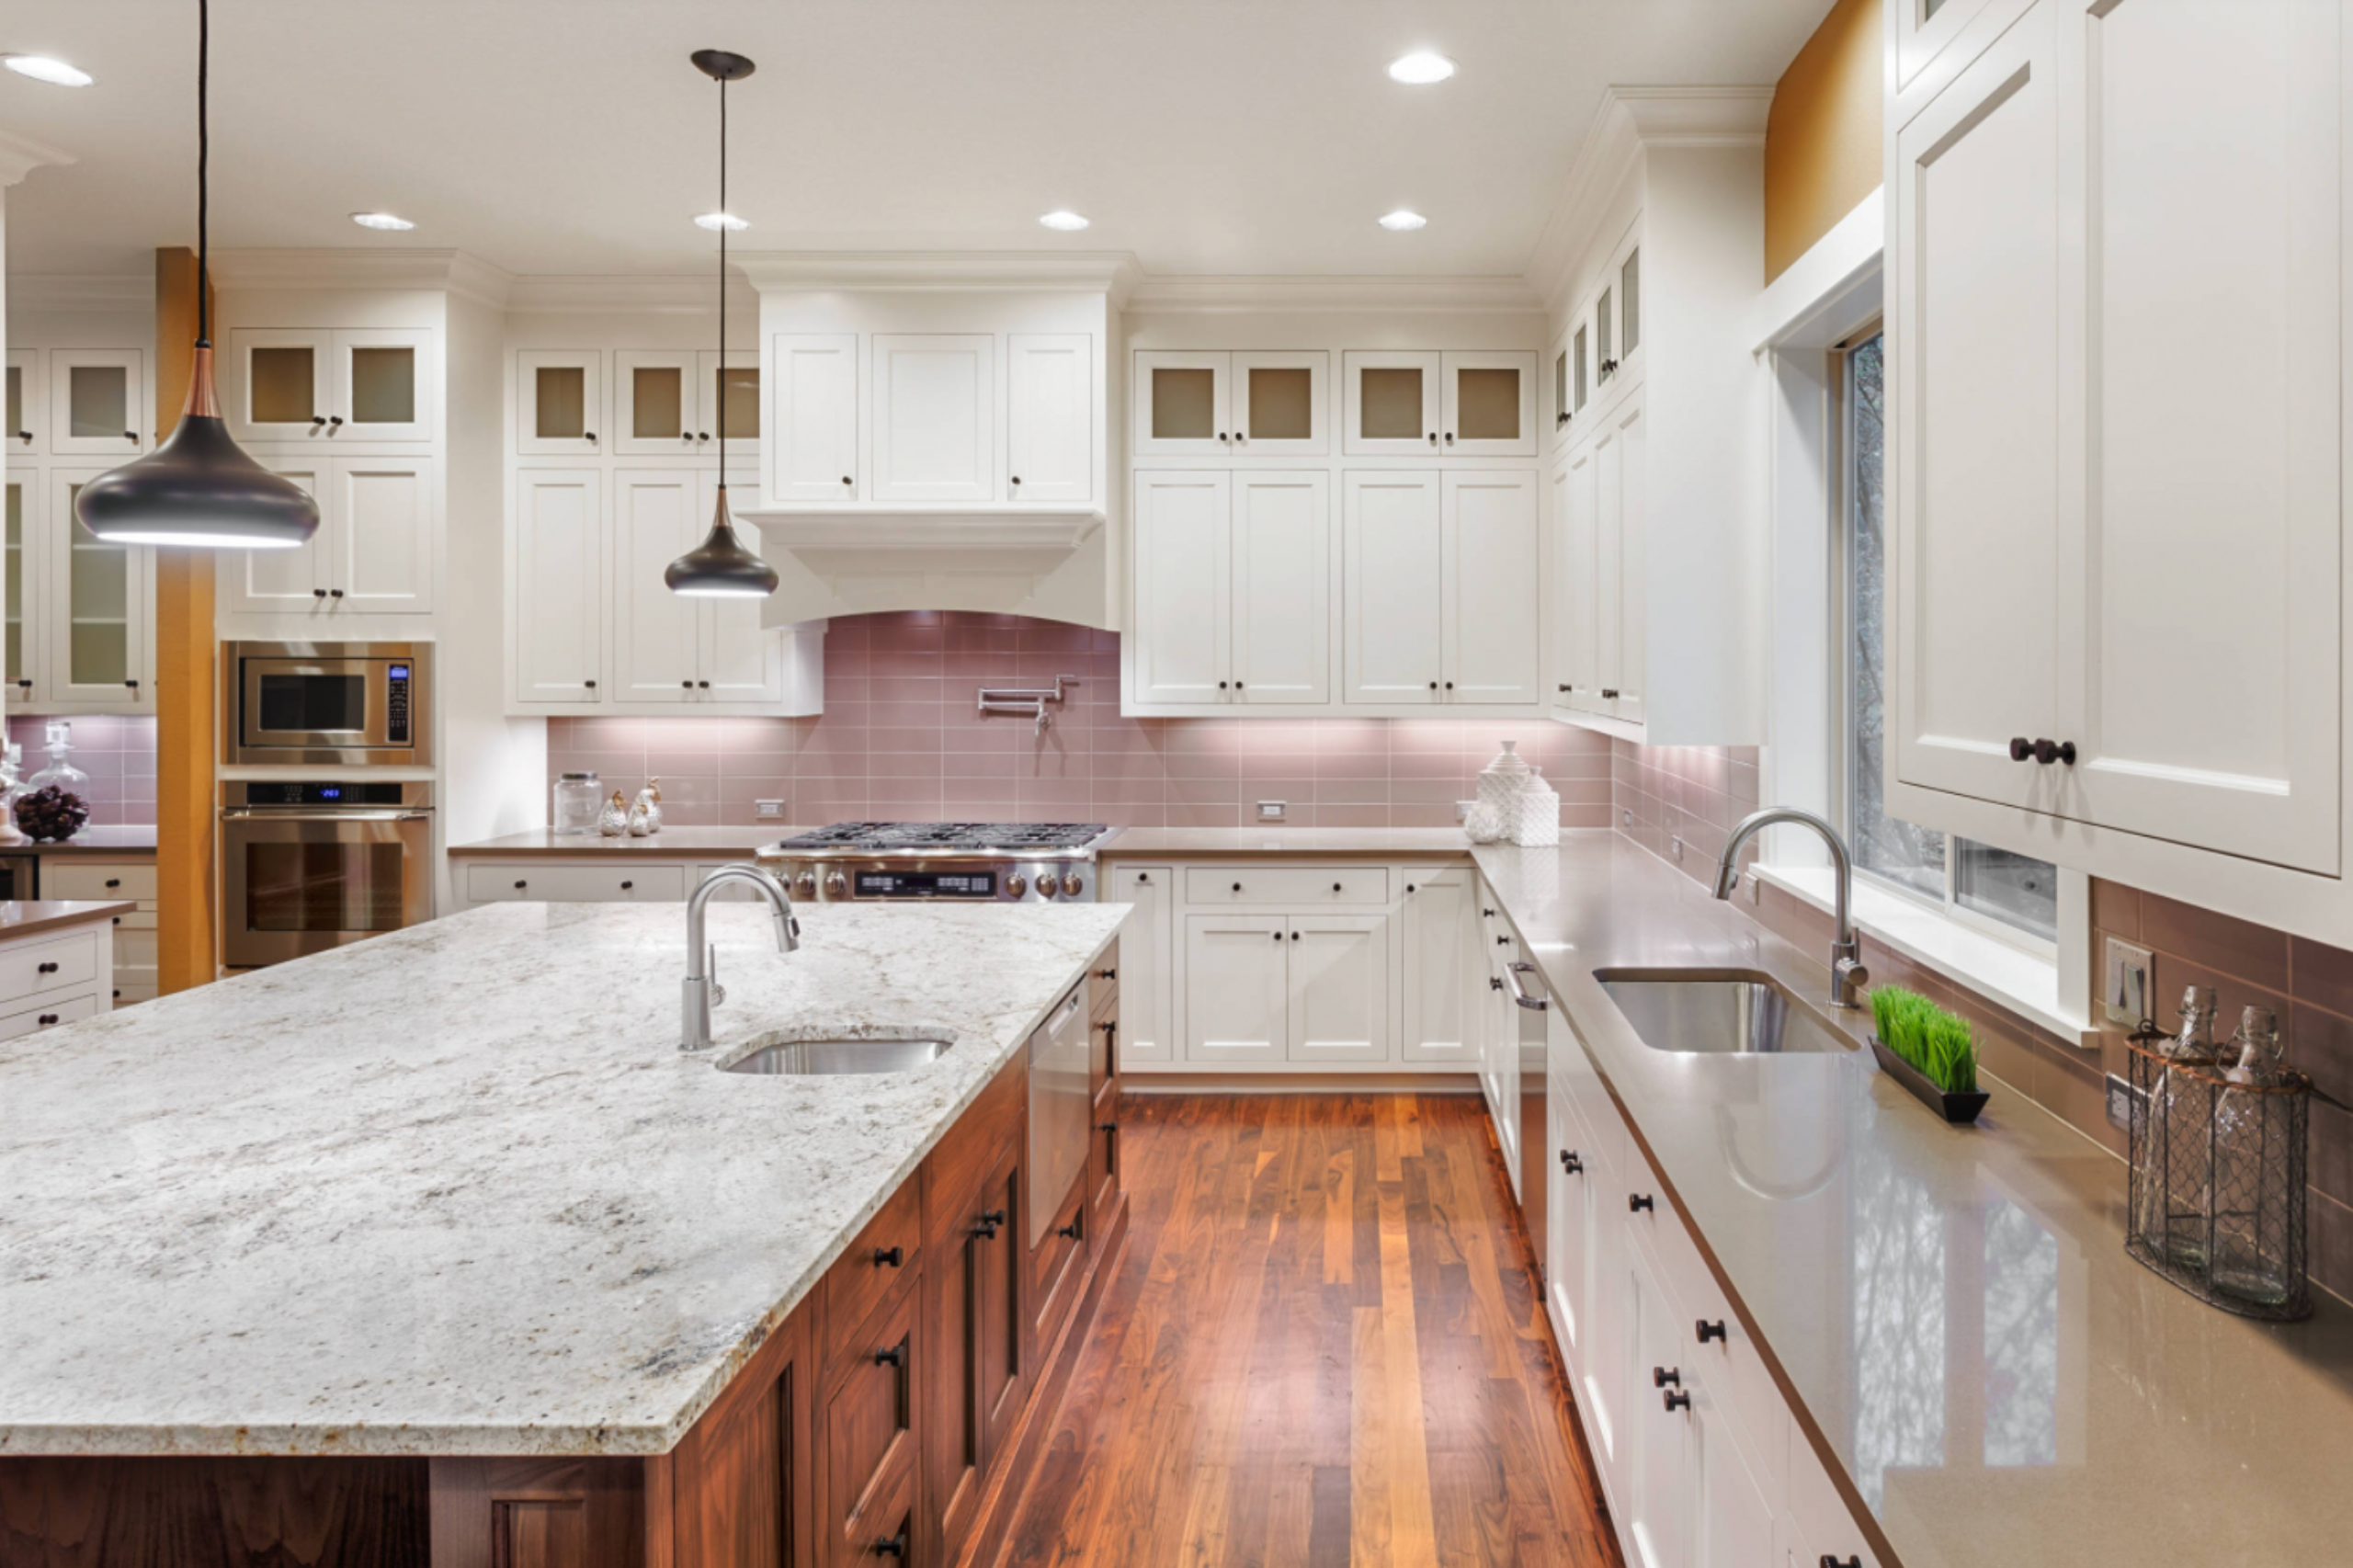 the-6-best-kitchen-layouts-to-consider-for-your-renovation-sebring-design-build